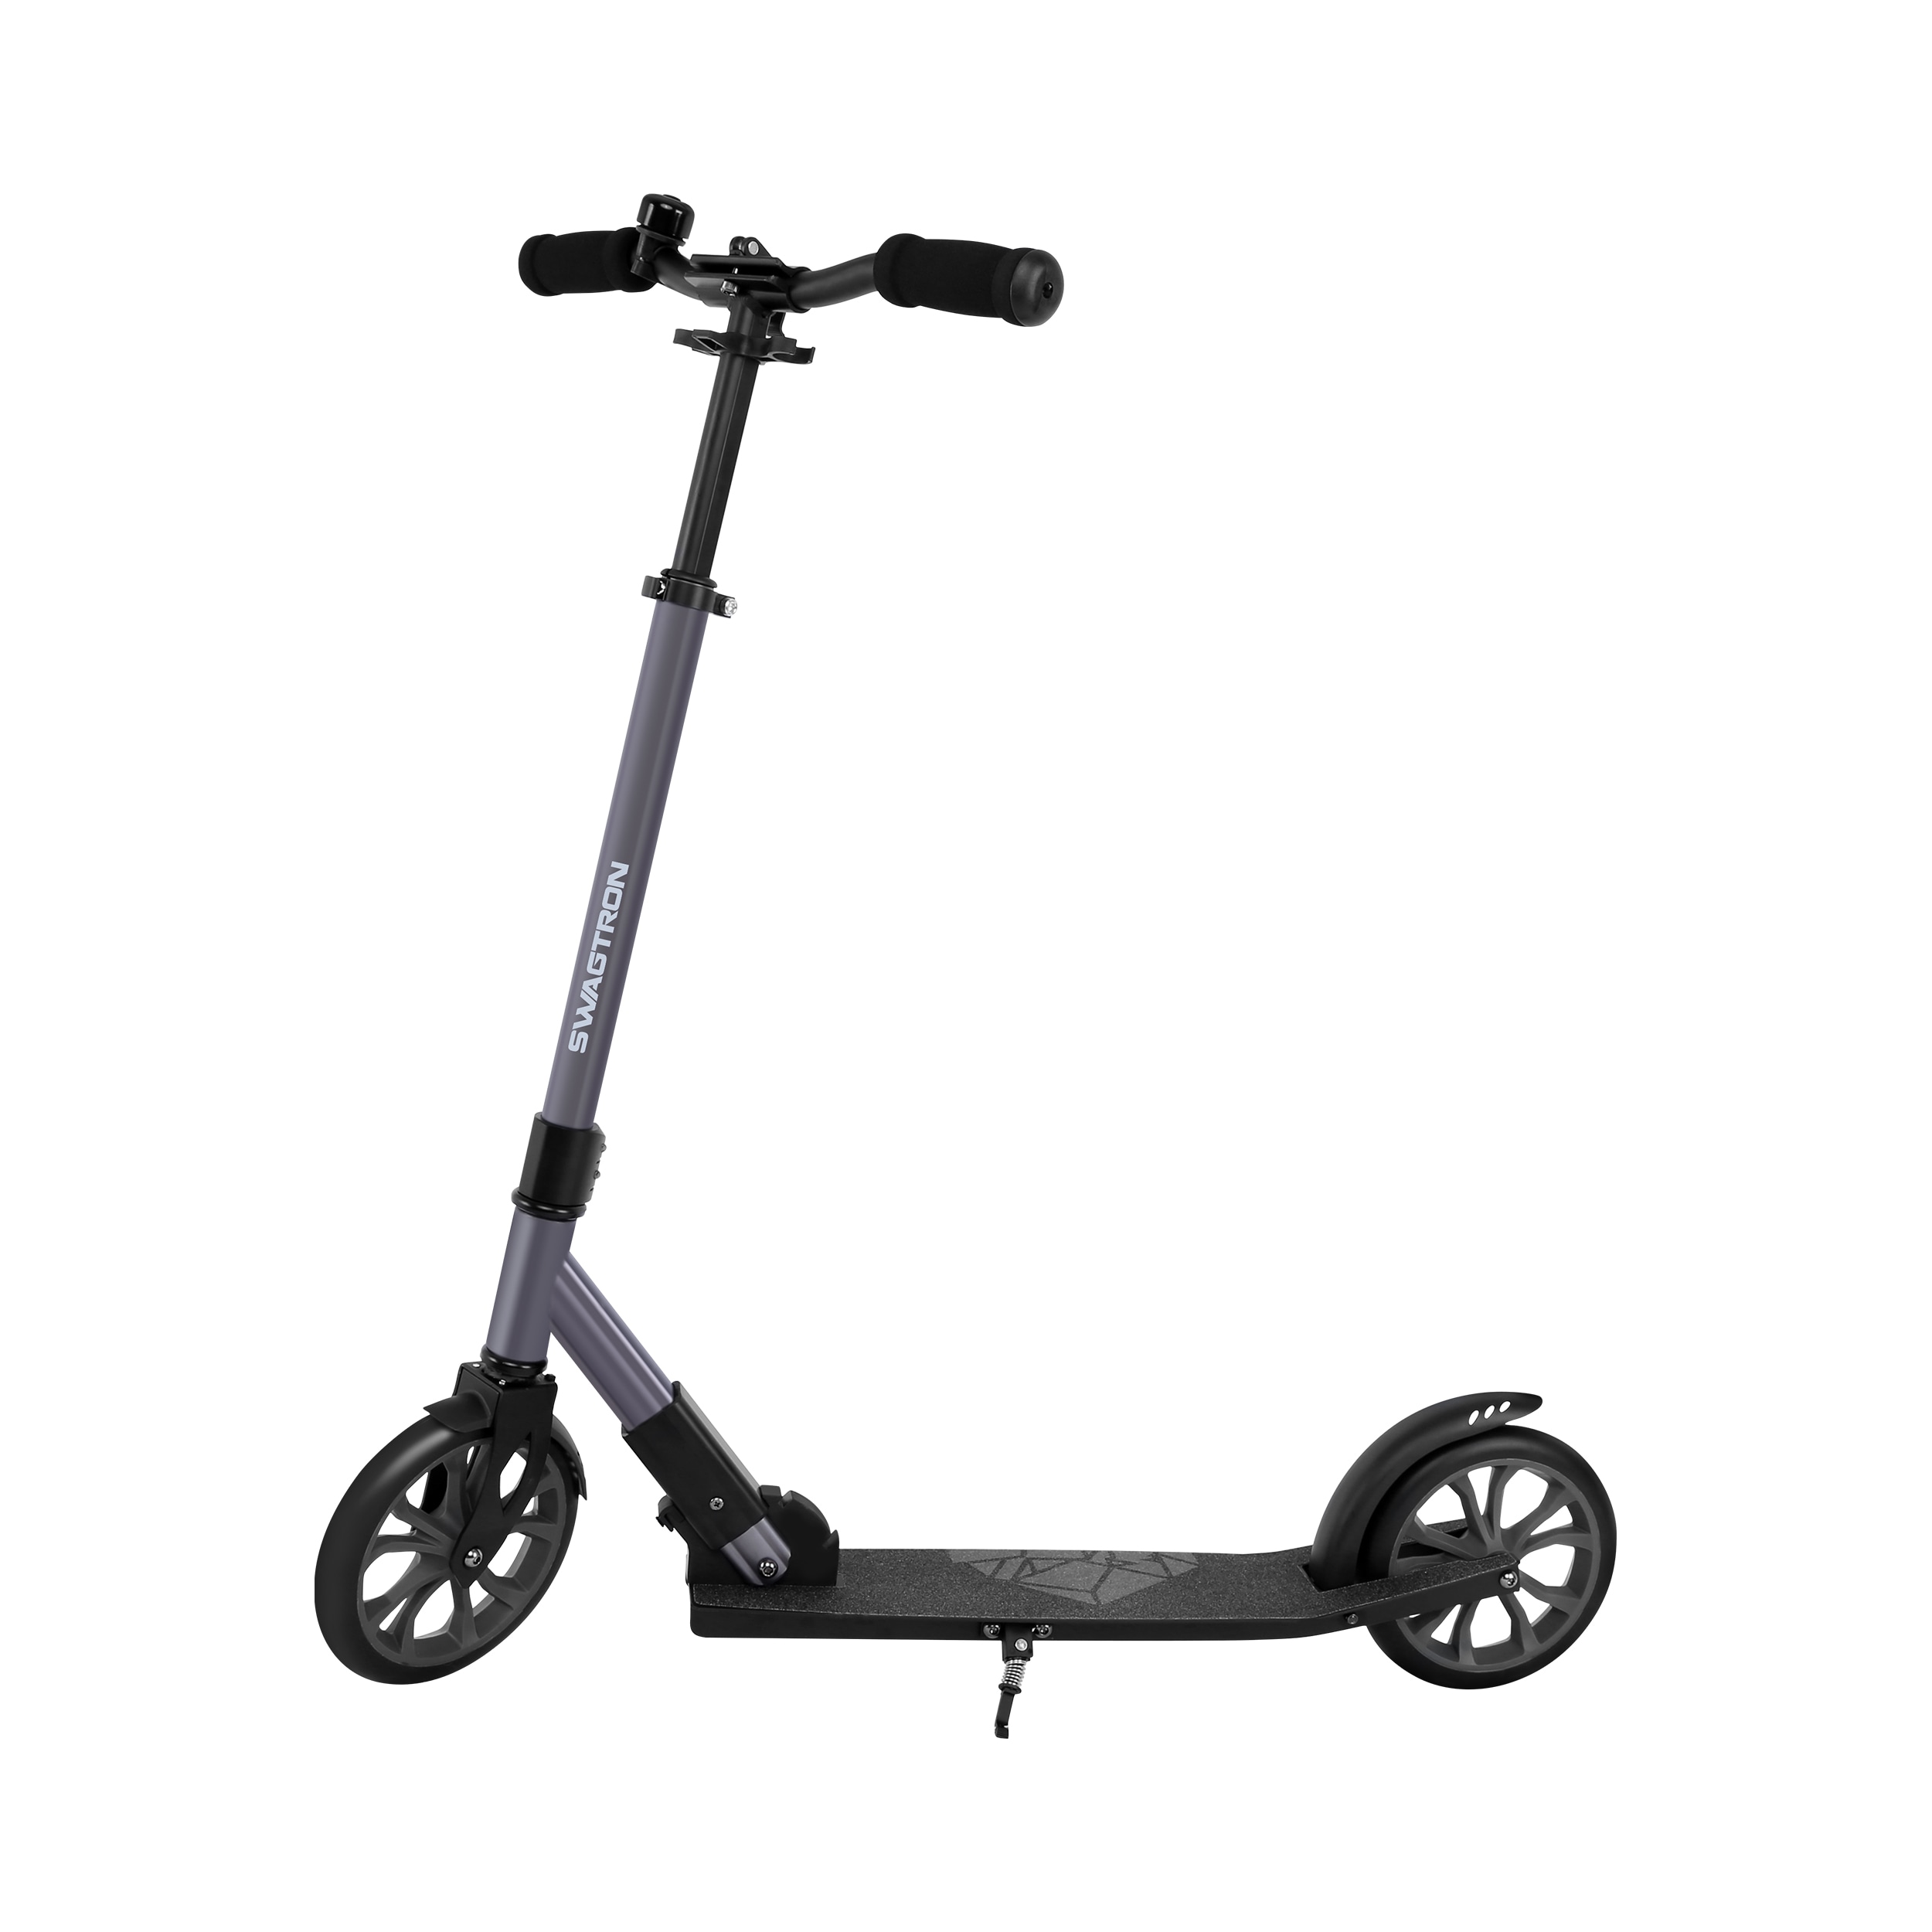 Swagtron K8 Titan Folding Commuter Kick Scooter For Adults in the Scooters department at Lowes.com